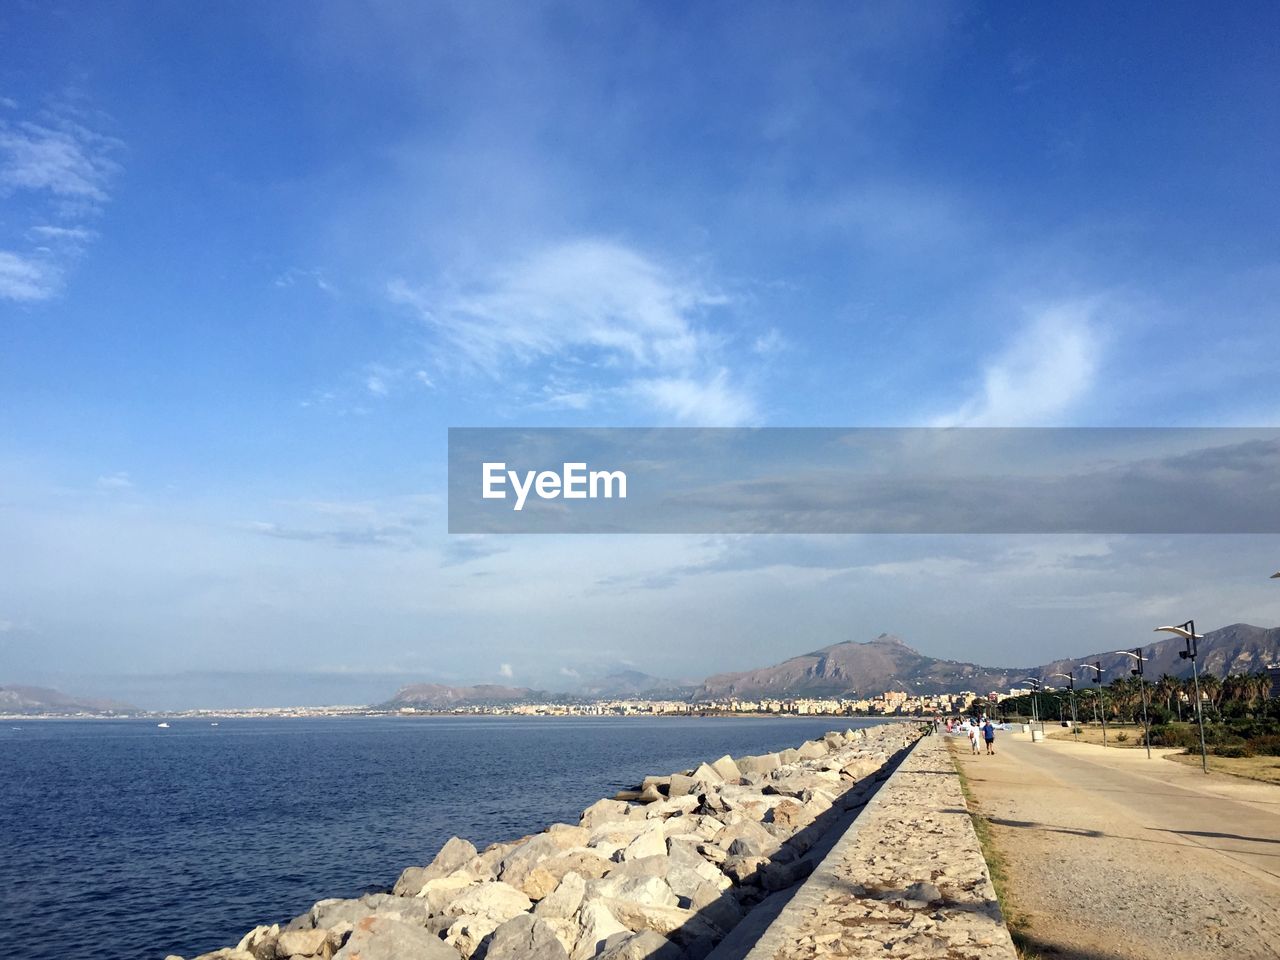 SCENIC VIEW OF SEA AND MOUNTAINS AGAINST BLUE SKY